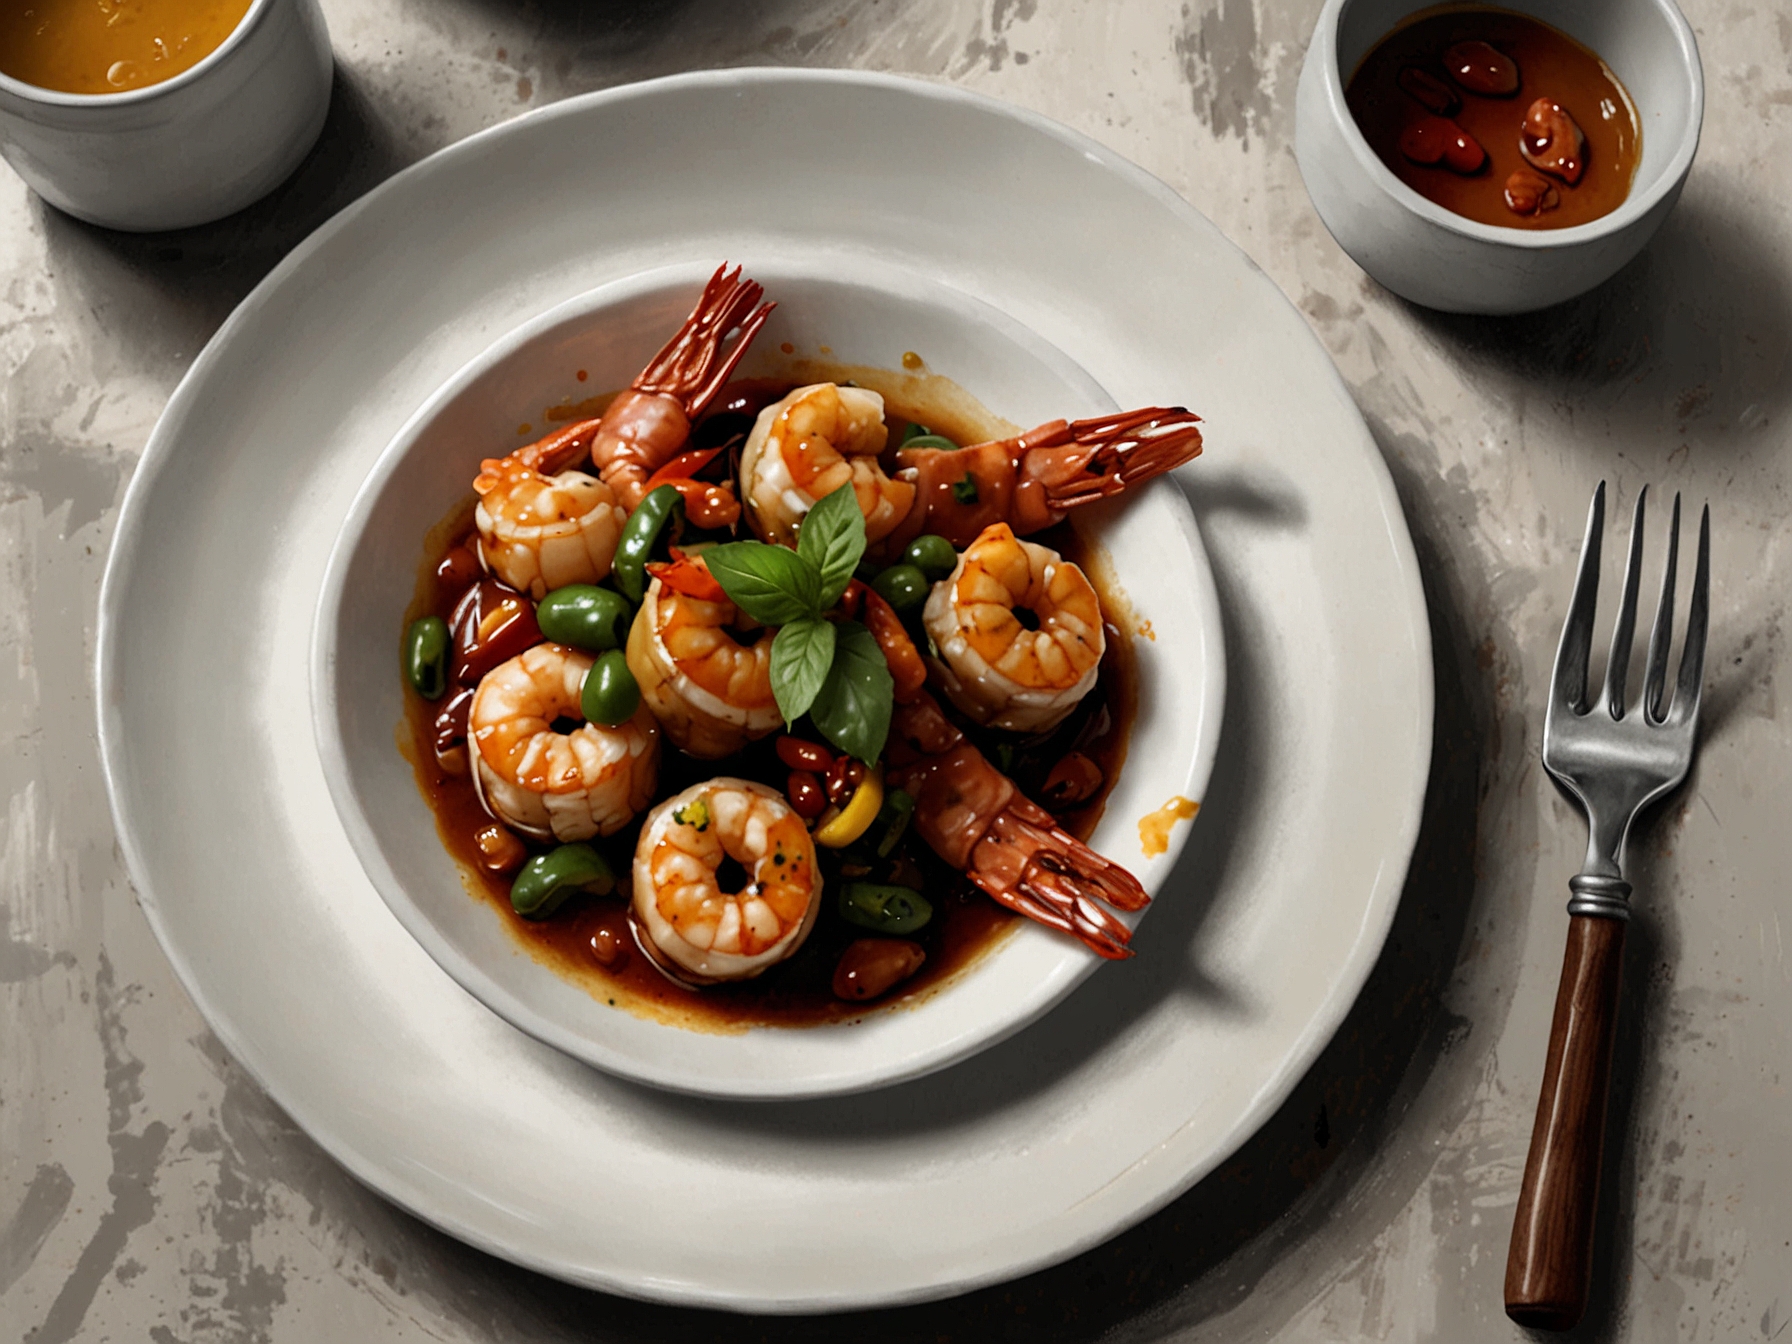 An elegantly plated dish of Kung Pao Prawns with Curry Leaf and Tamarind at Chef Manish Malhotra's restaurant, reflecting the seasonal and innovative nature of Chindian cuisine.